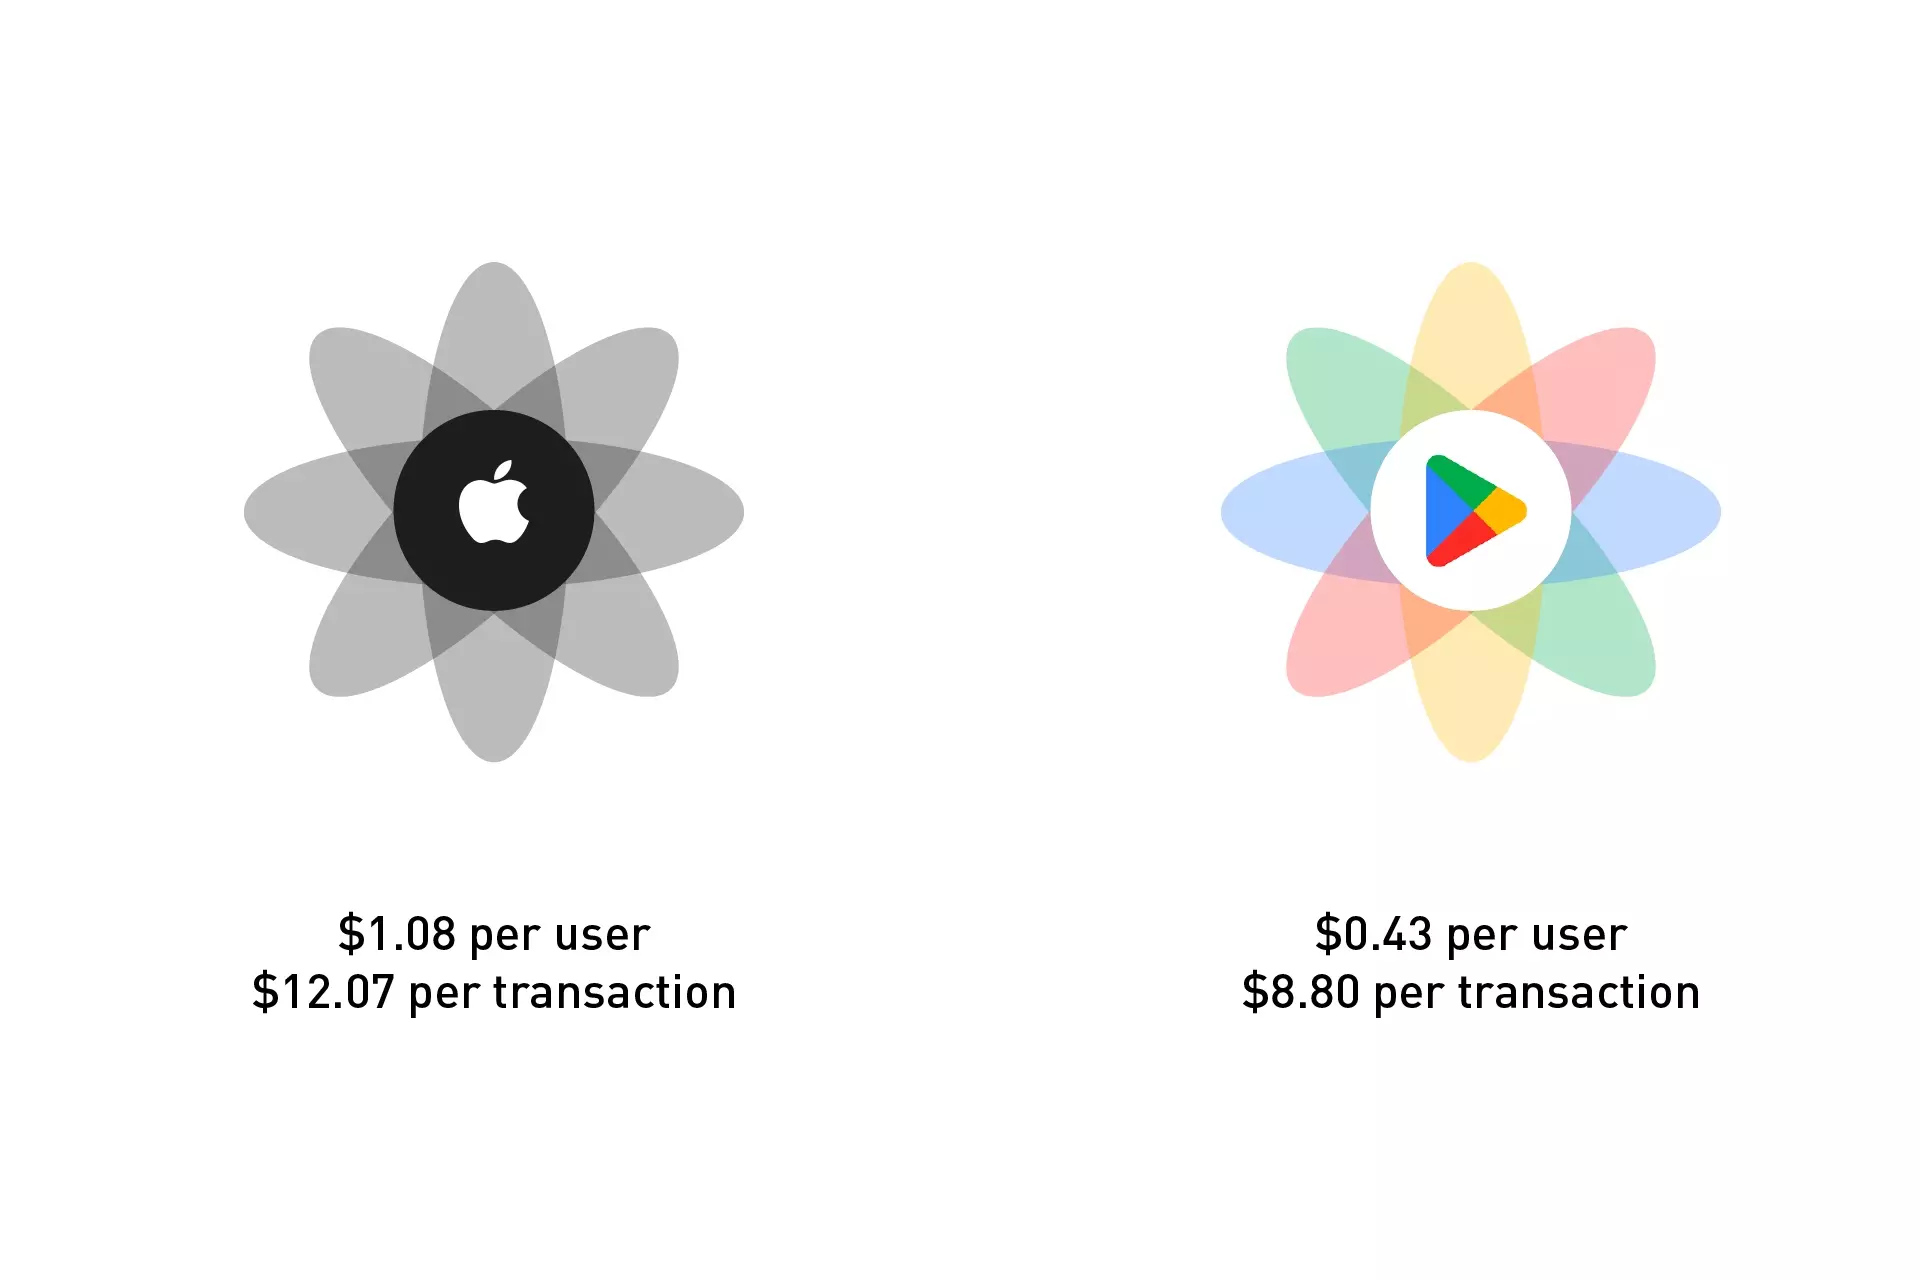 <p>The comparison of average consumer spending on In-App Purchases which is described below.</p>